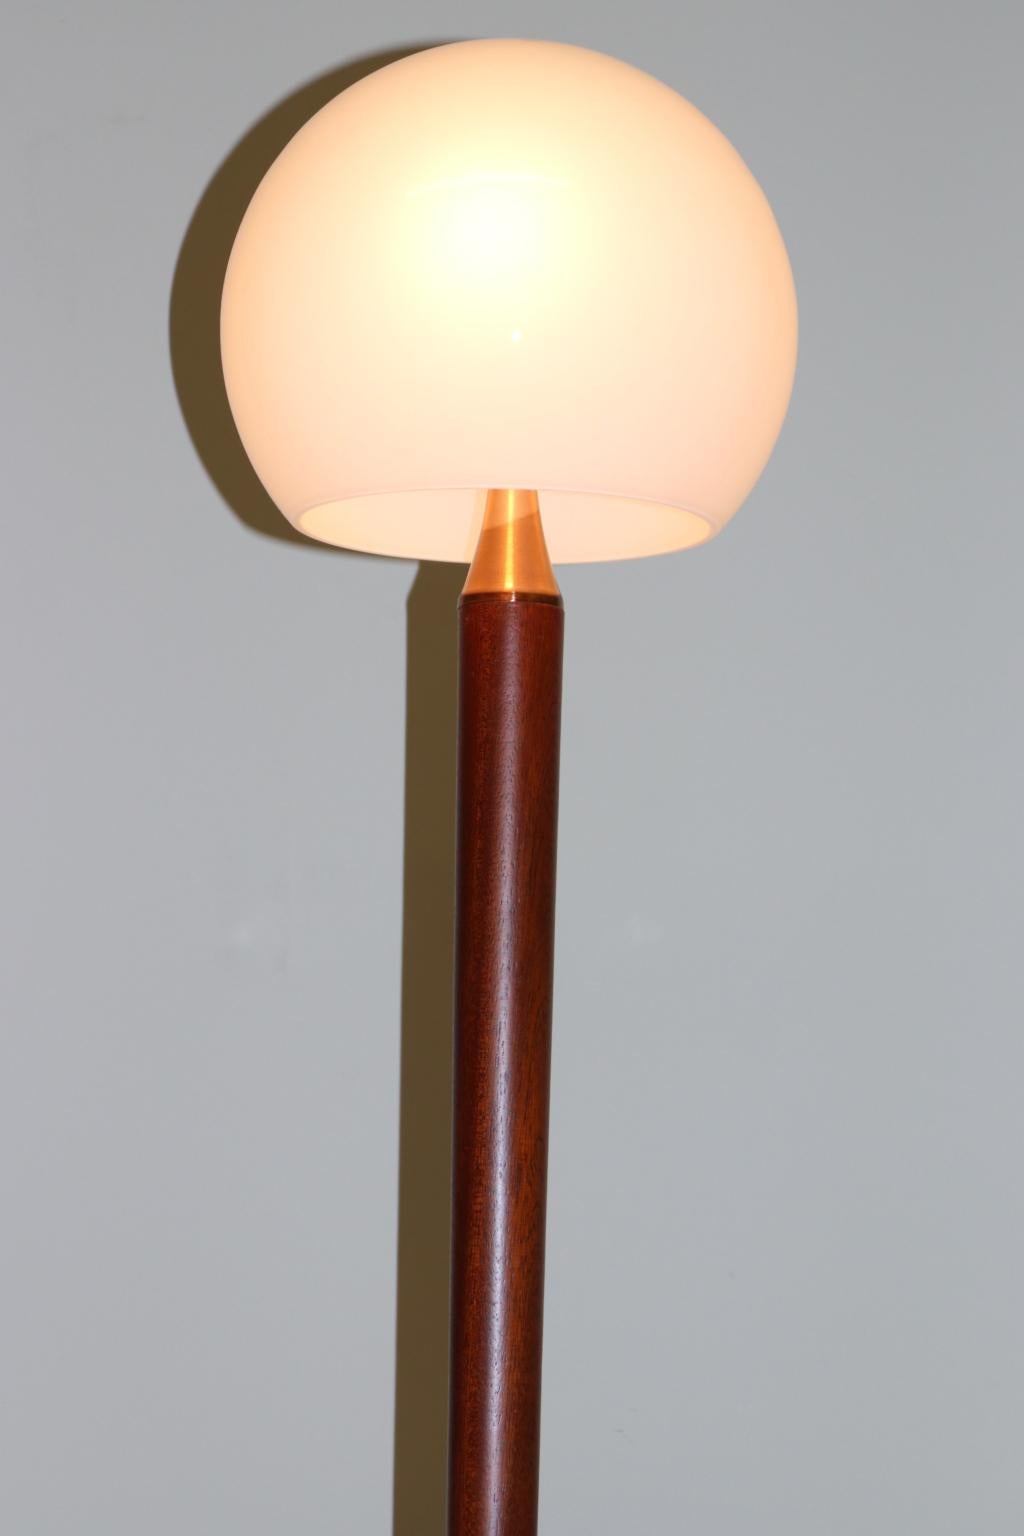 Late 20th Century Italian Floor Lamp White Murano Glass Solid Wood Stem and Brushed Copper Details For Sale